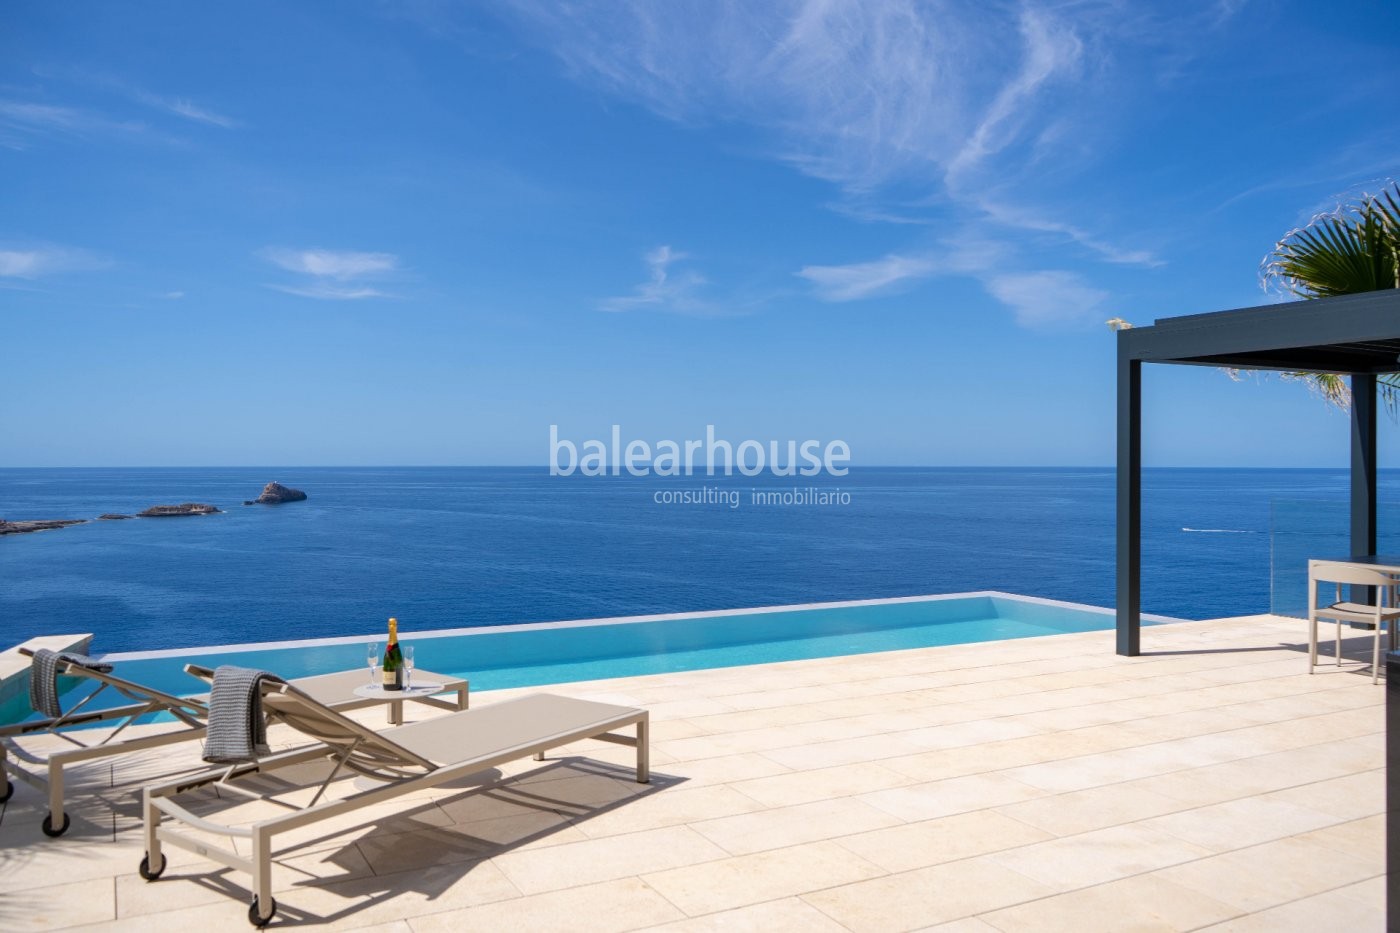 Impressive seafront villa with spectacular views of the Mediterranean near Port Adriano.